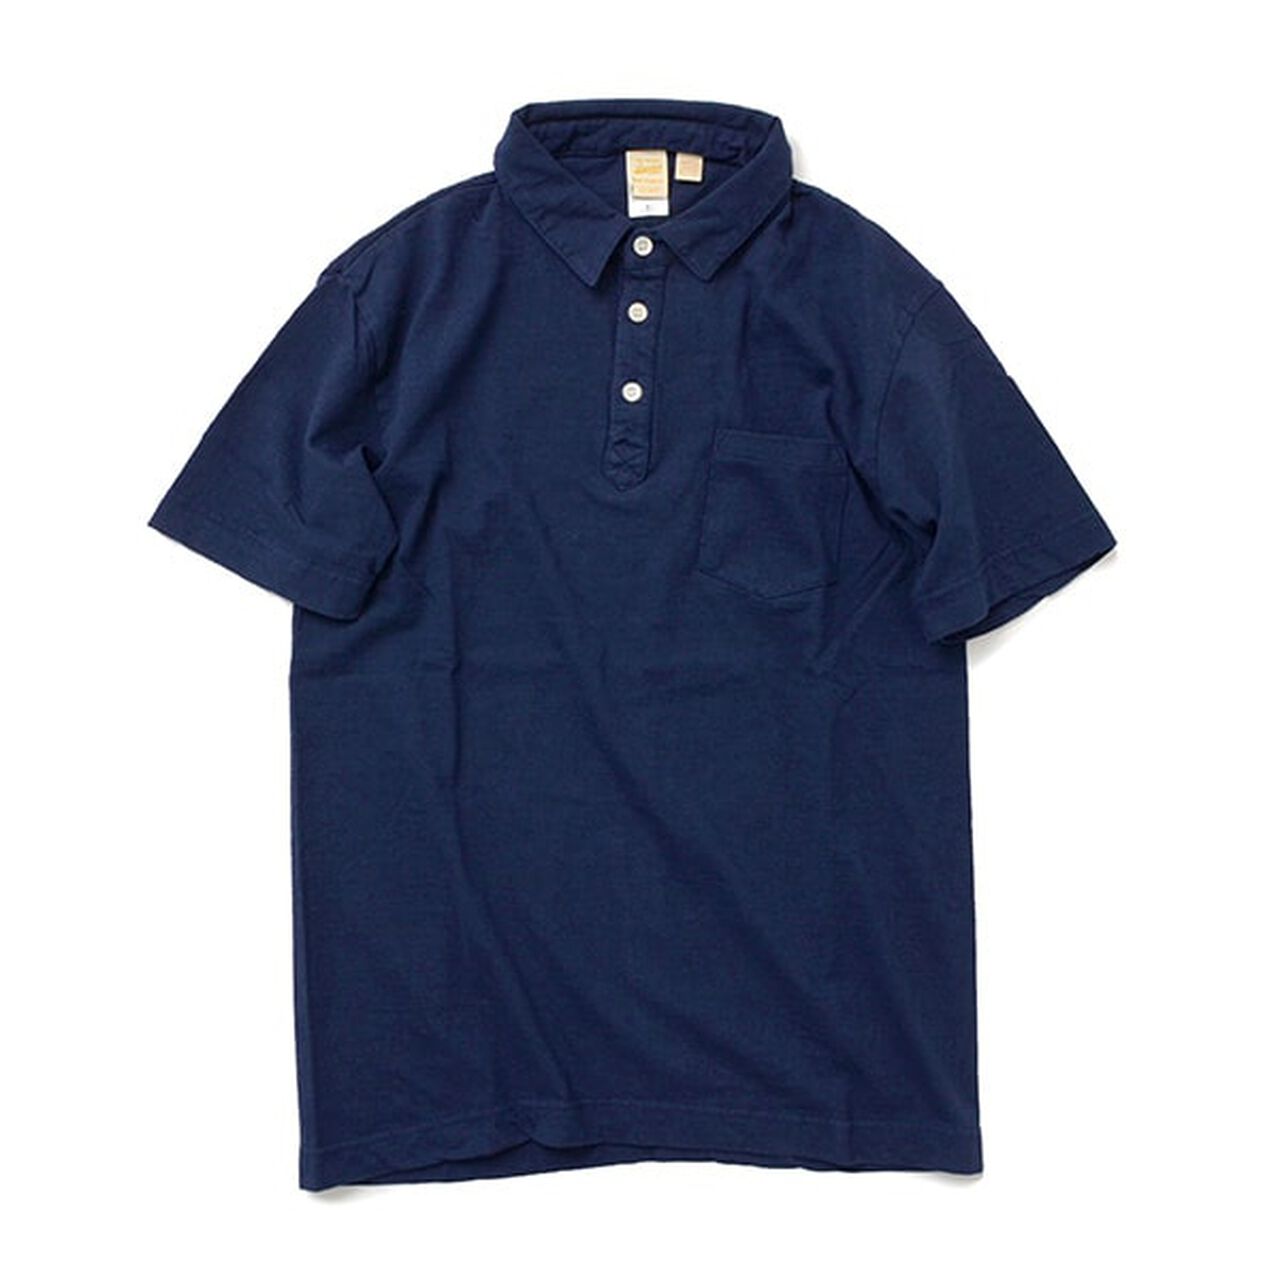 BR-1006 Hanging Jersey Short Sleeve Polo Shirt,Navy, large image number 0